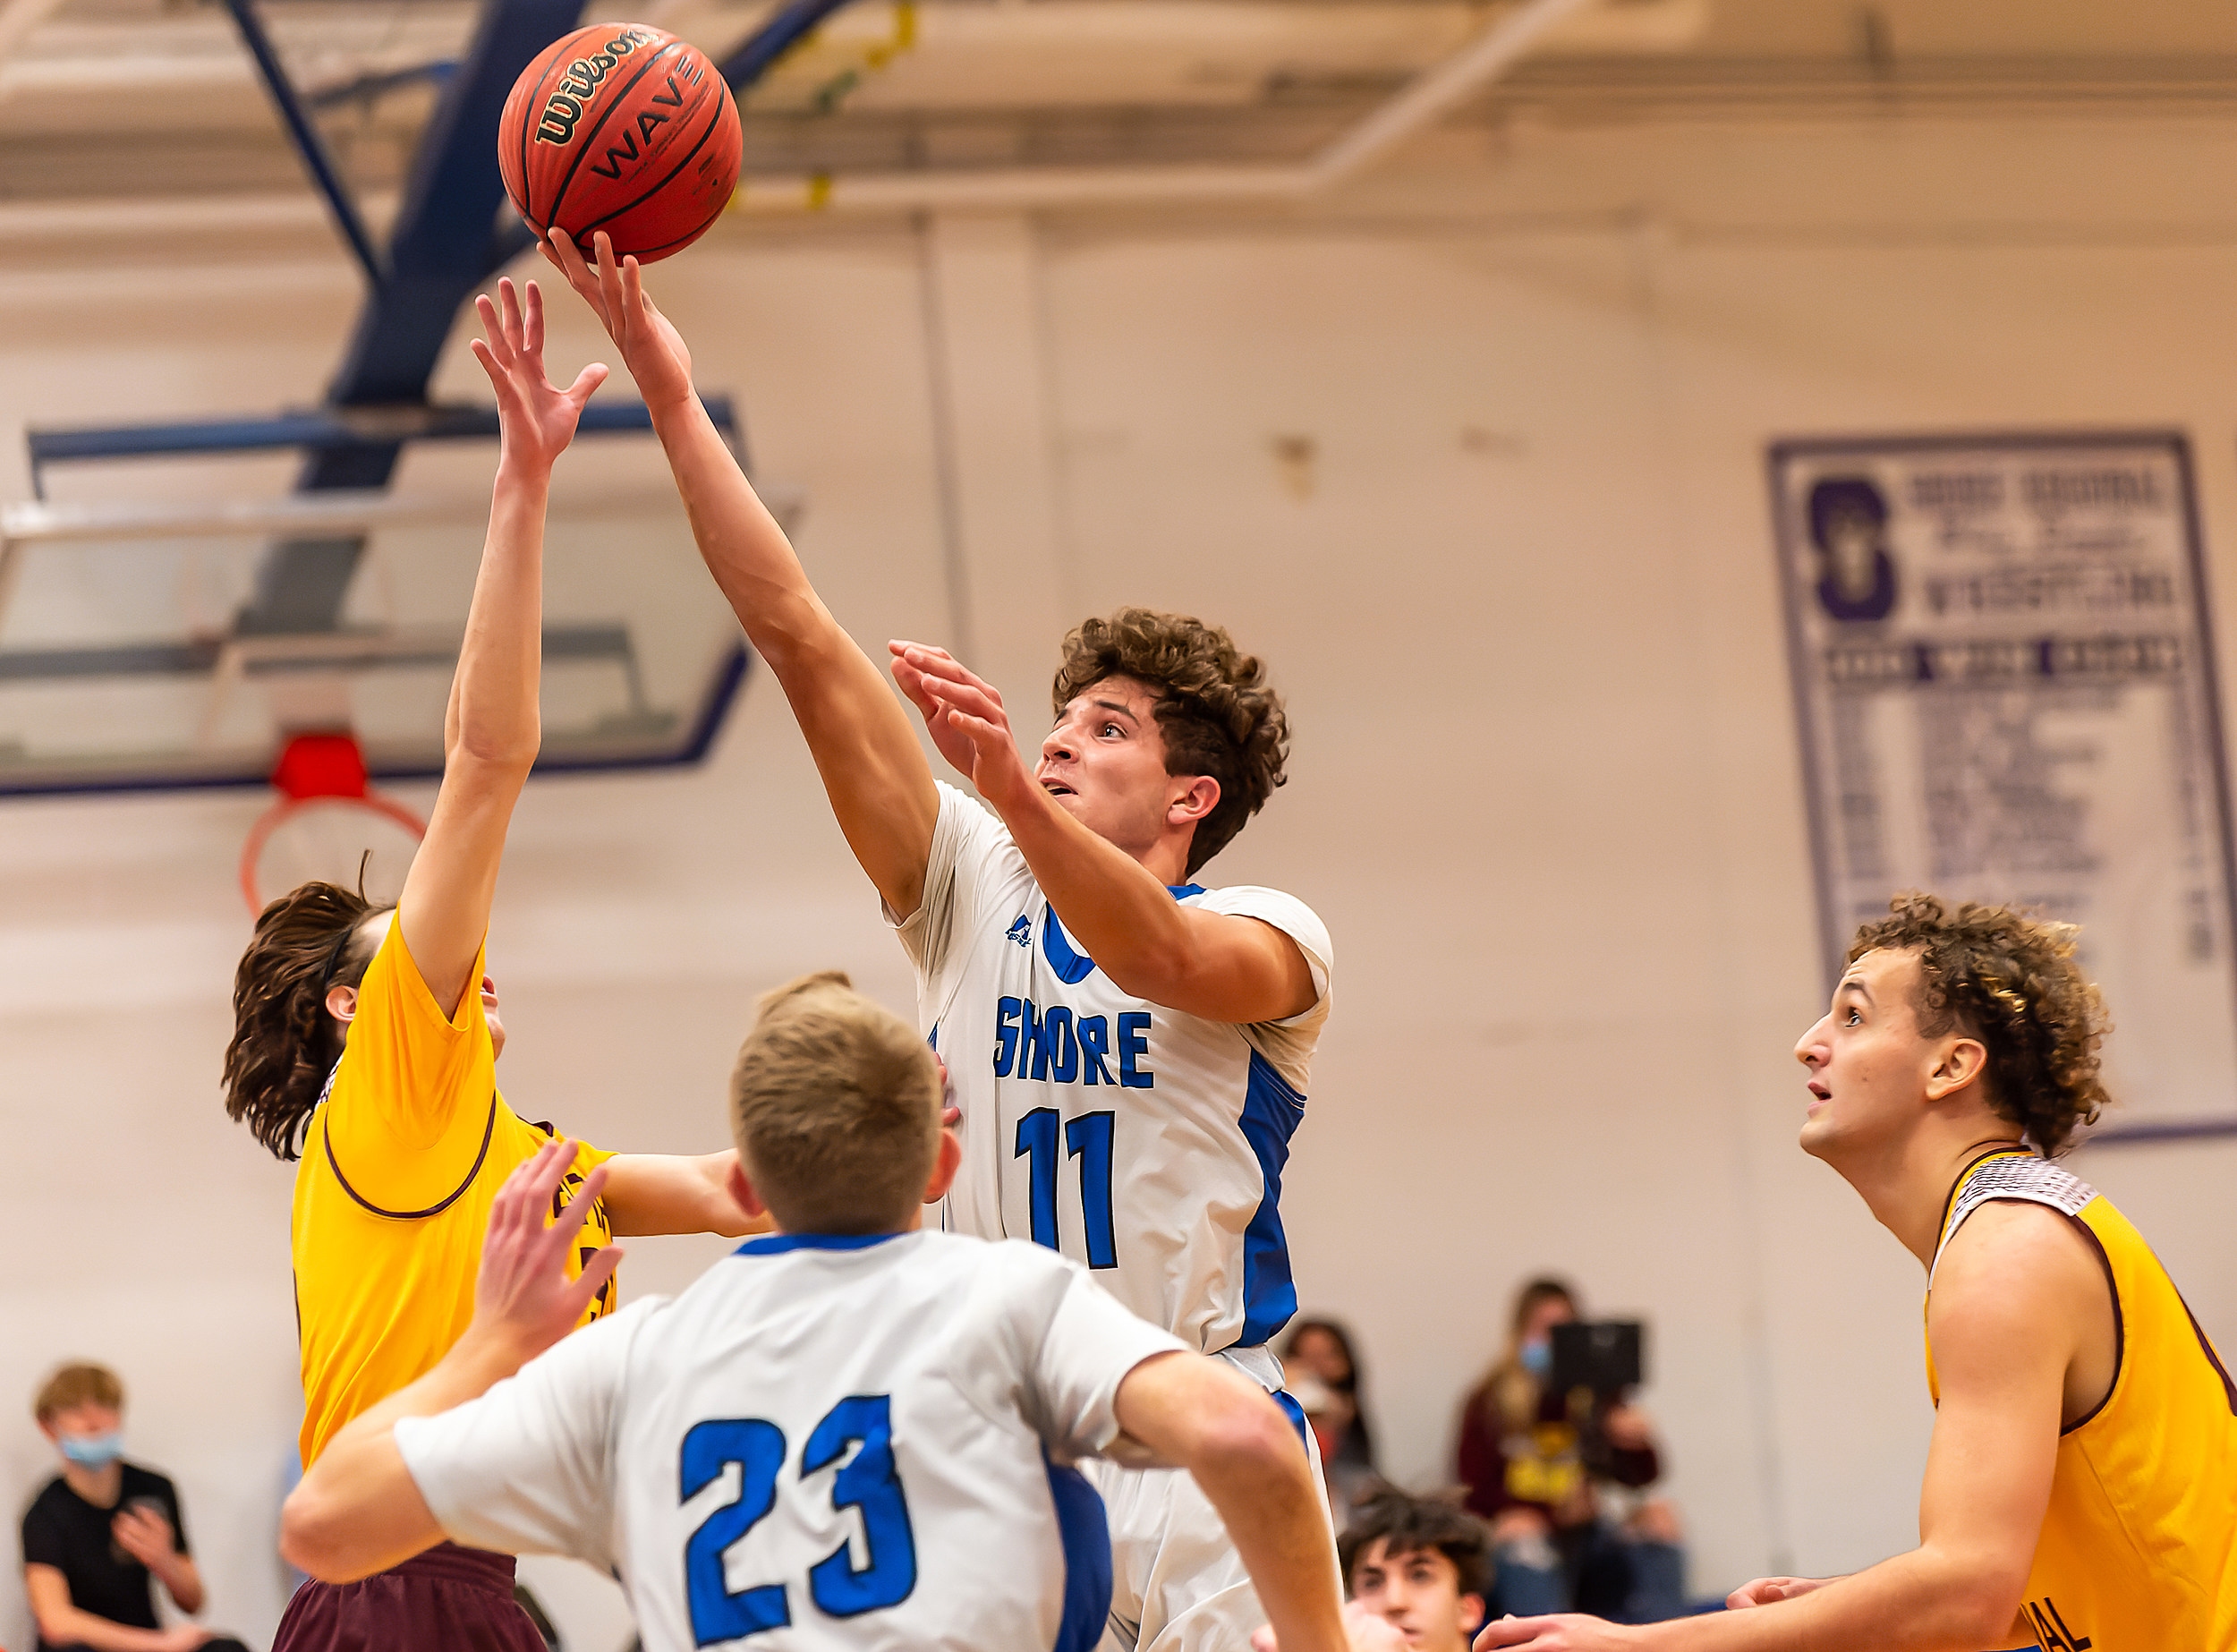 Basketball: Blue Devil boys can't find footing in tournament loss